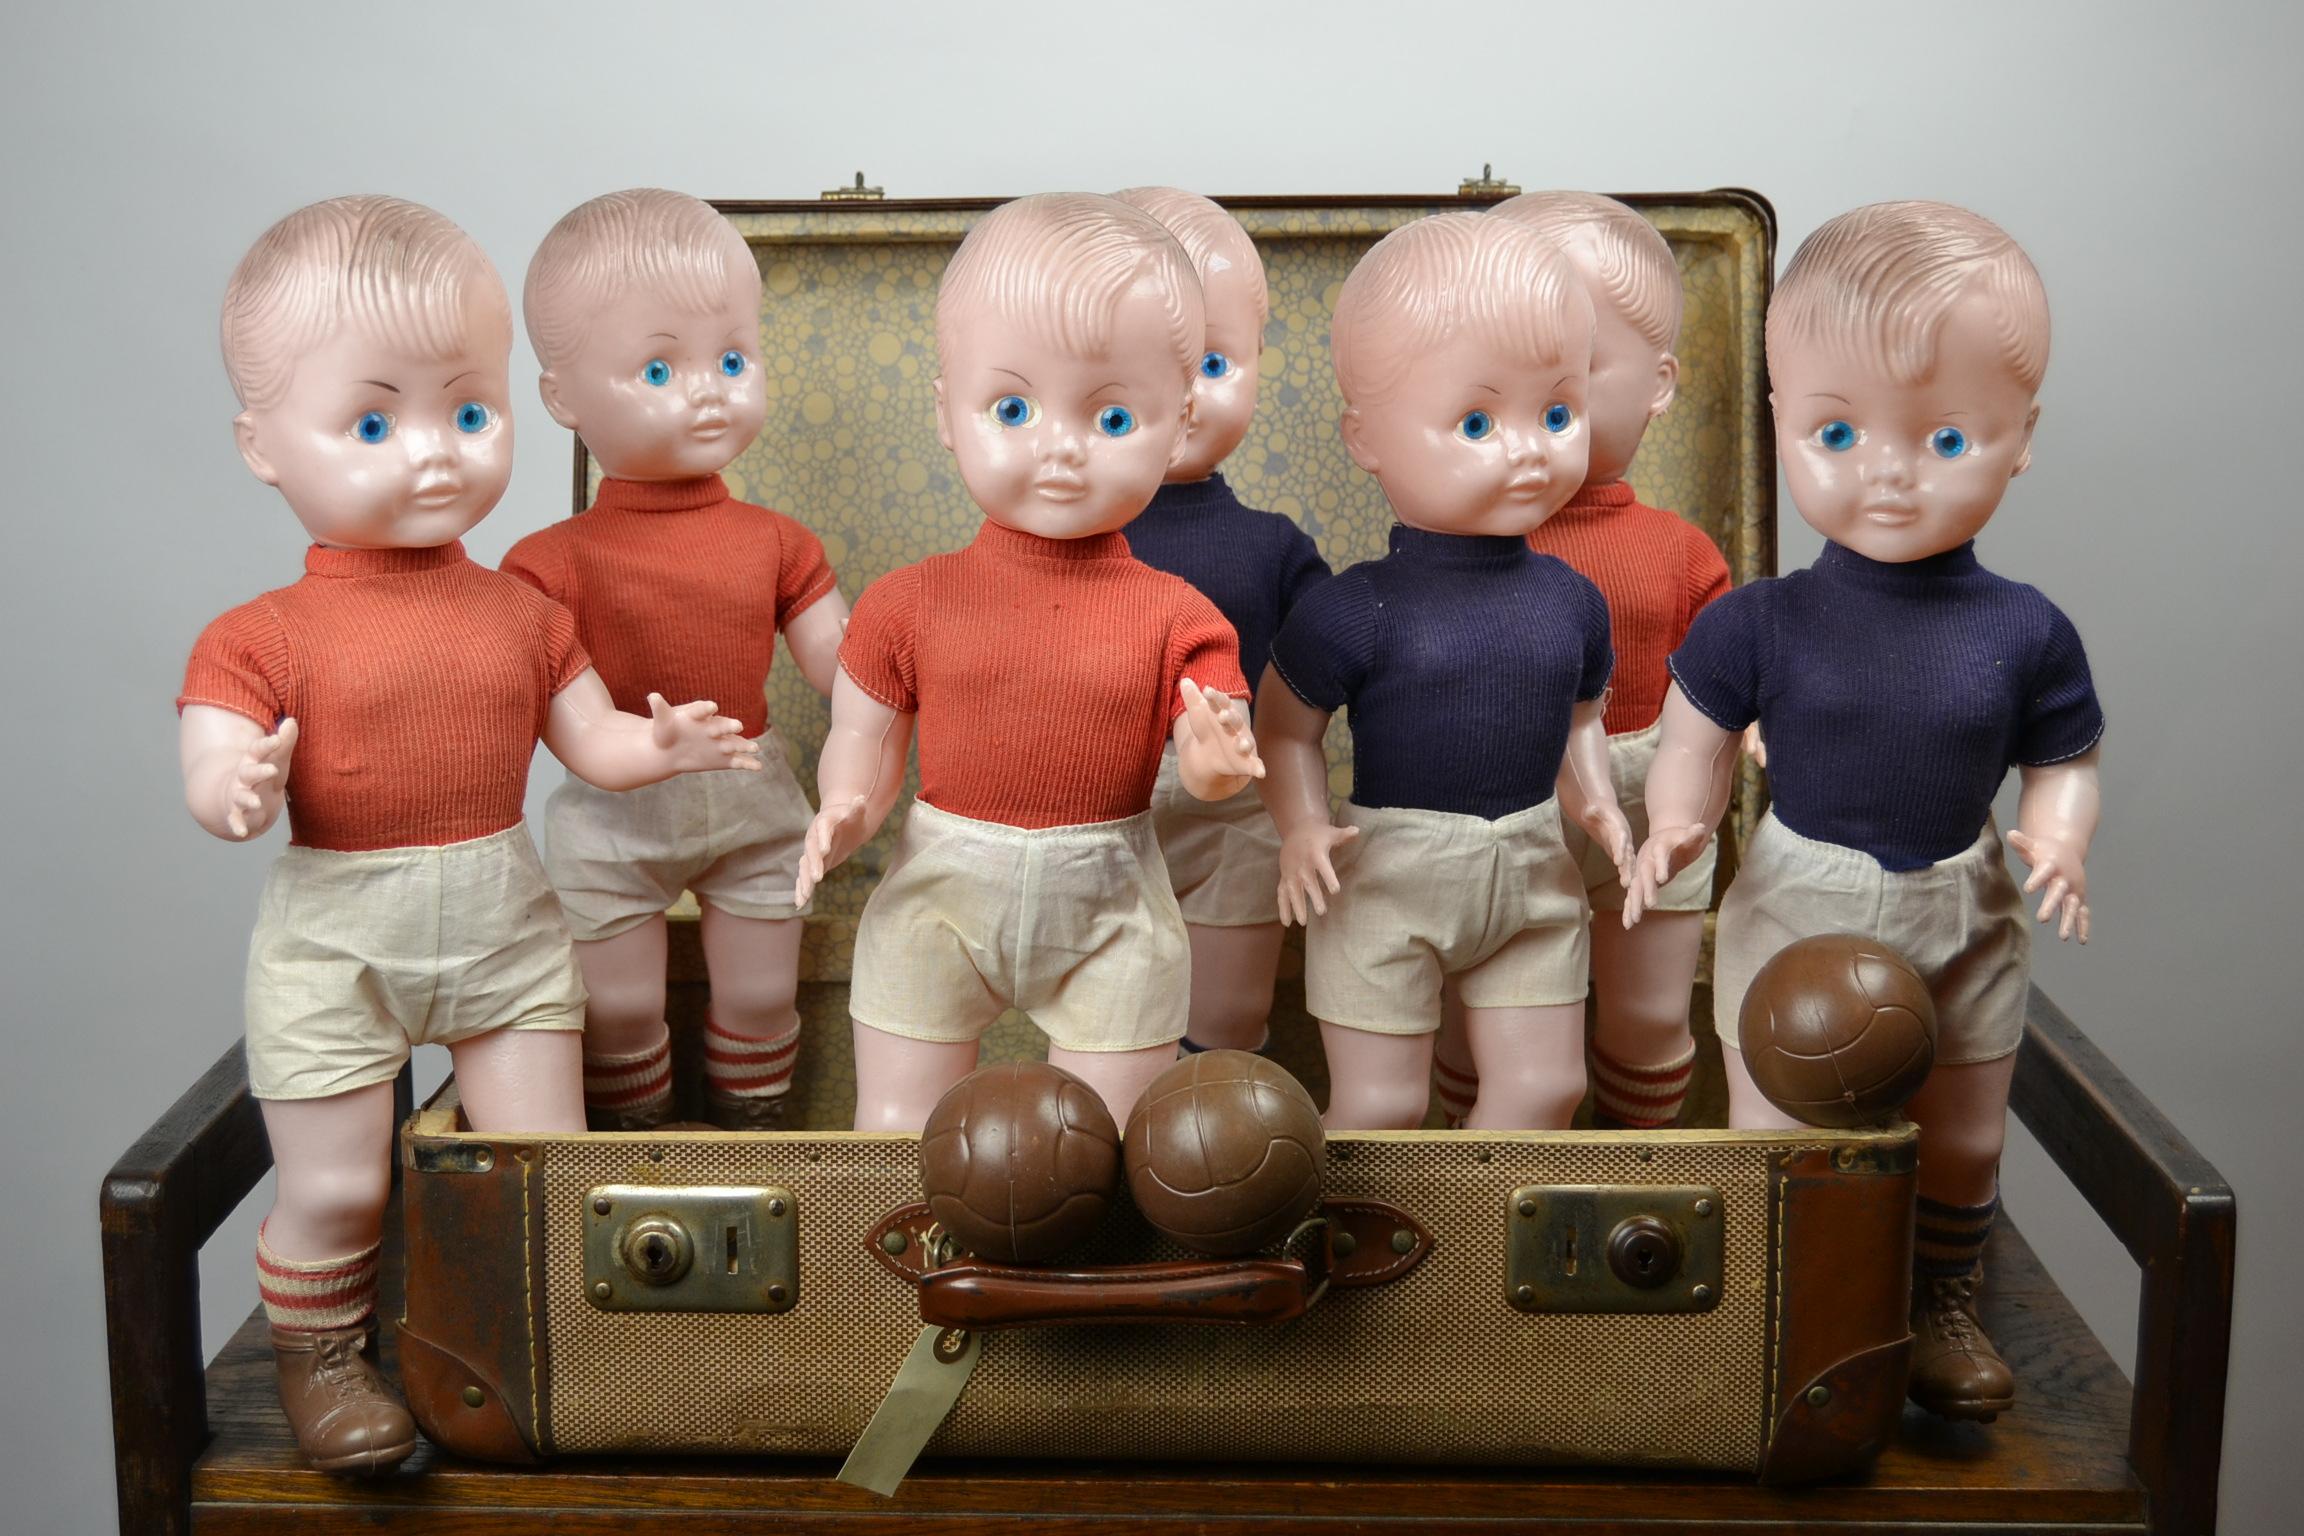 7 Dolls in Soccer Outfit, Football Outfit, 1960s, Hard Plastic 6